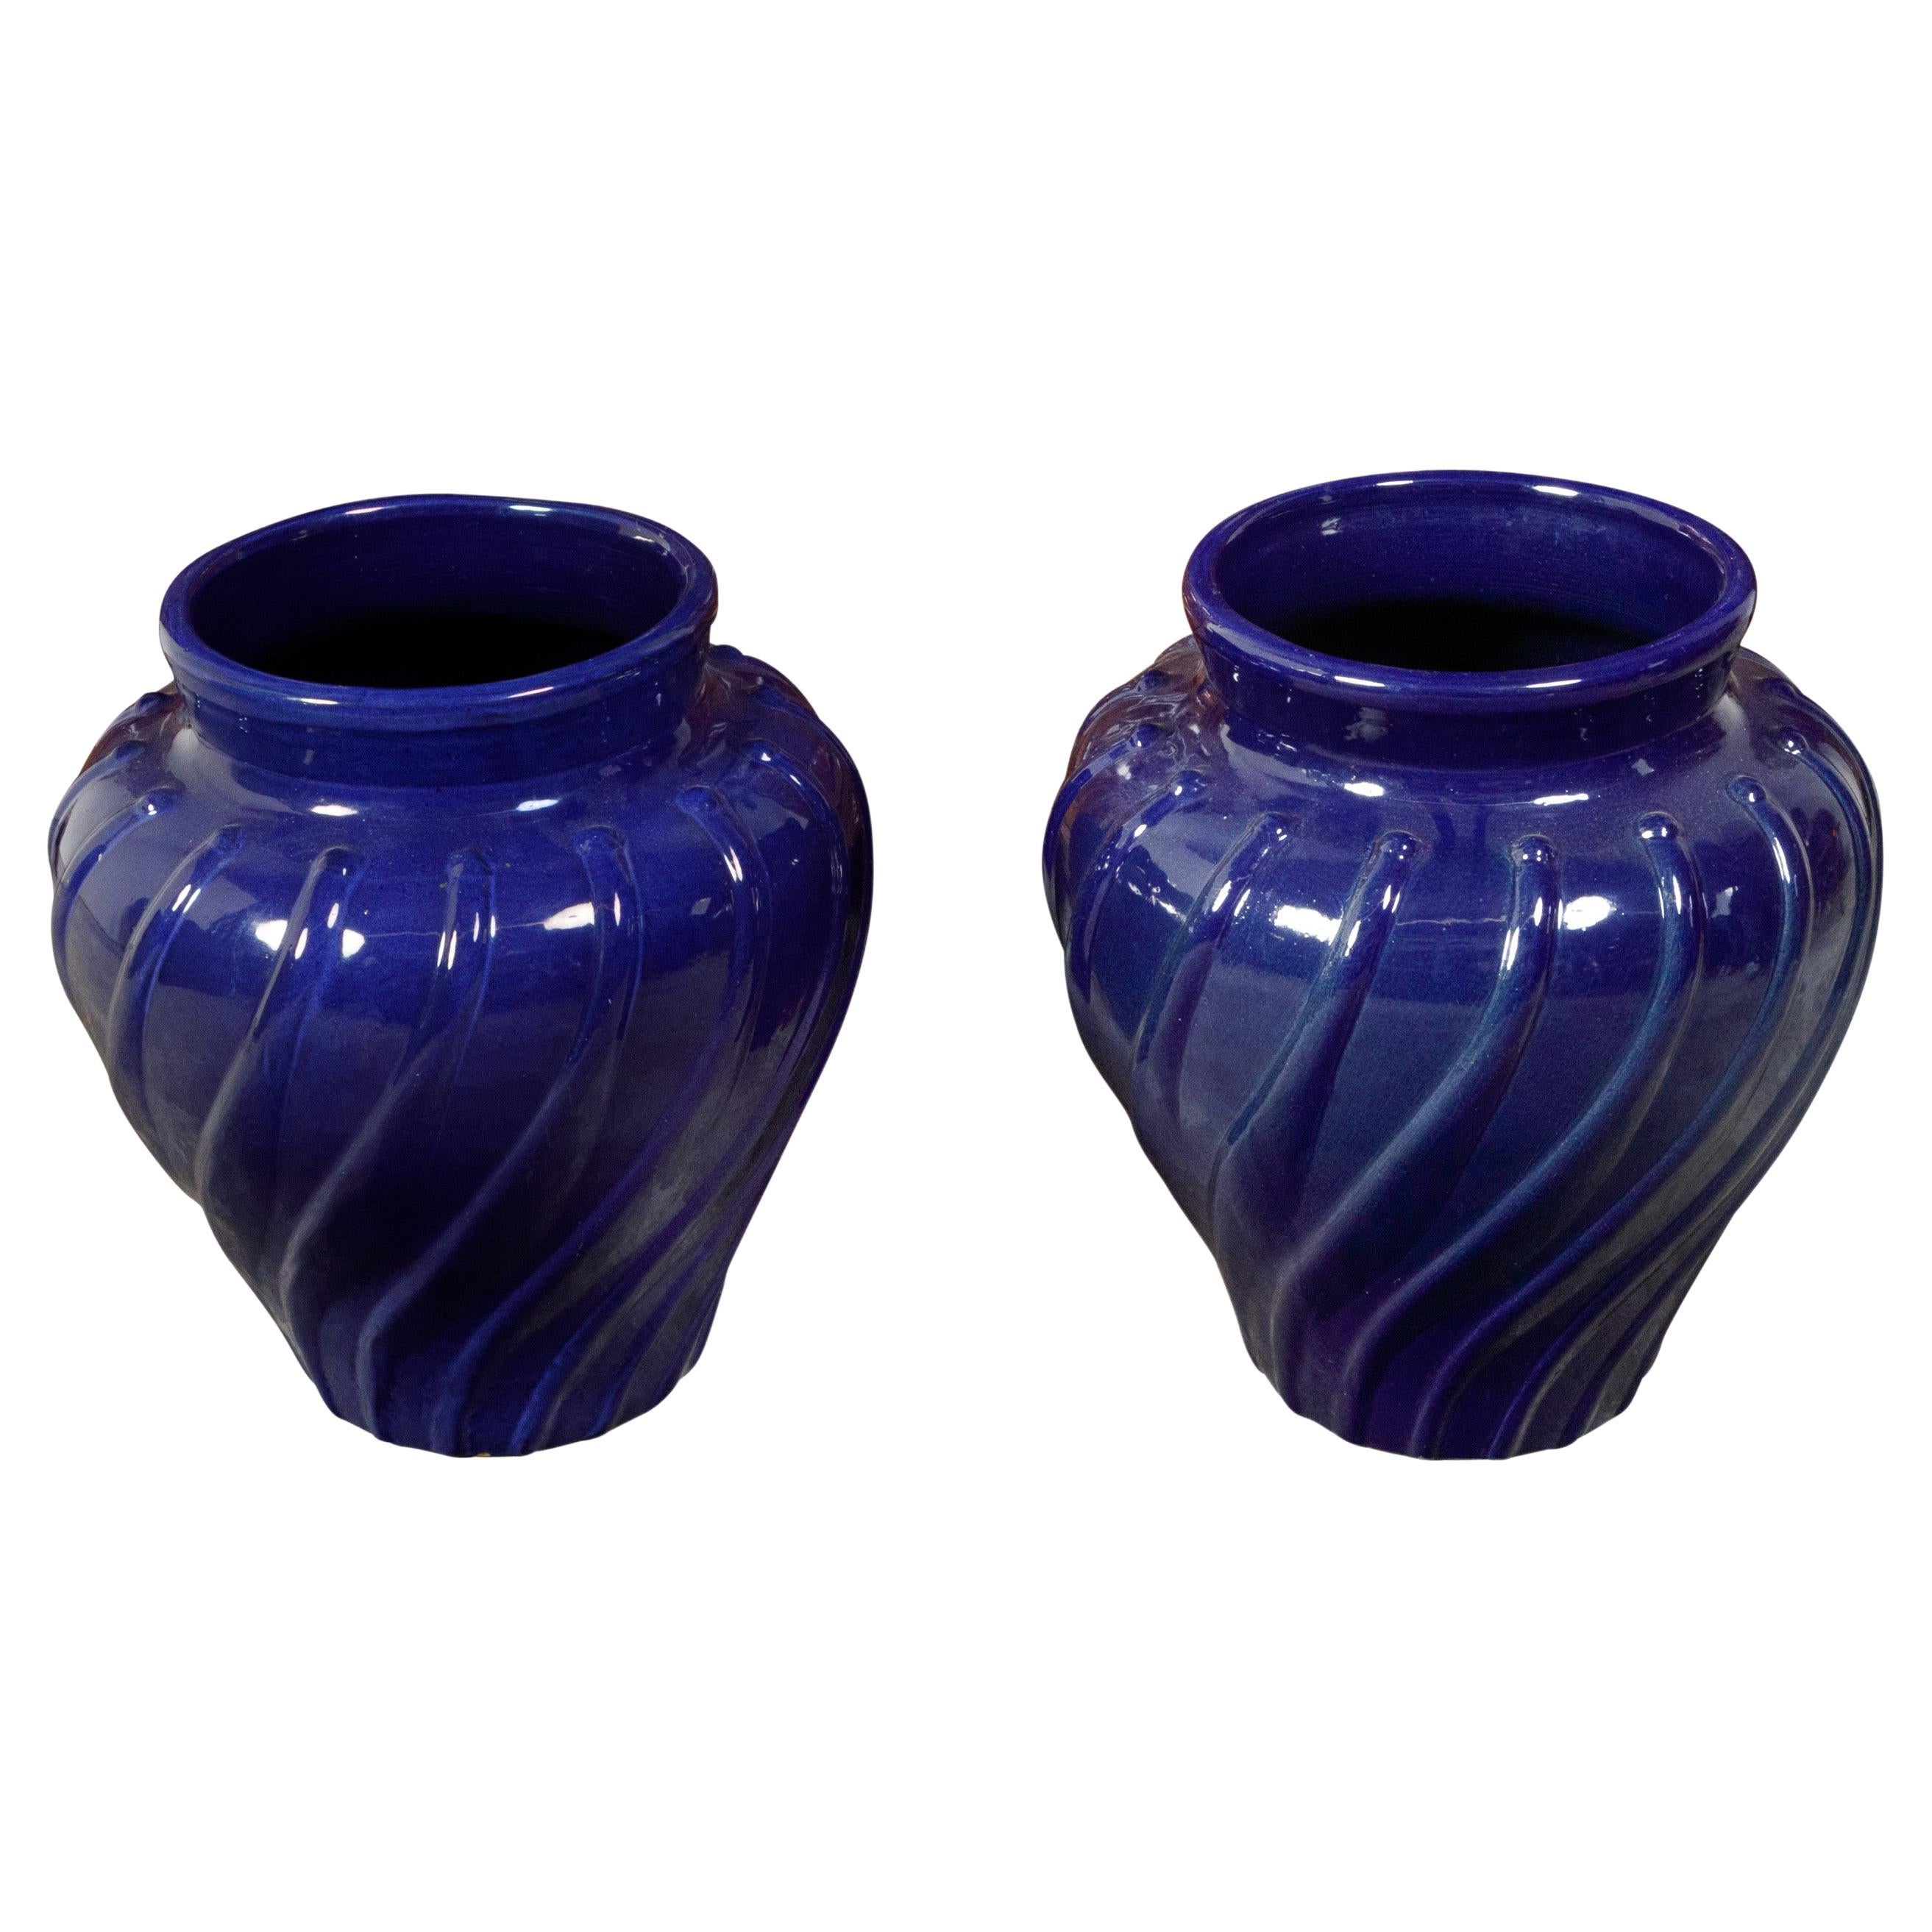 Pair of 1920s Cobalt Blue Pottery Planters with Wavy Patterns